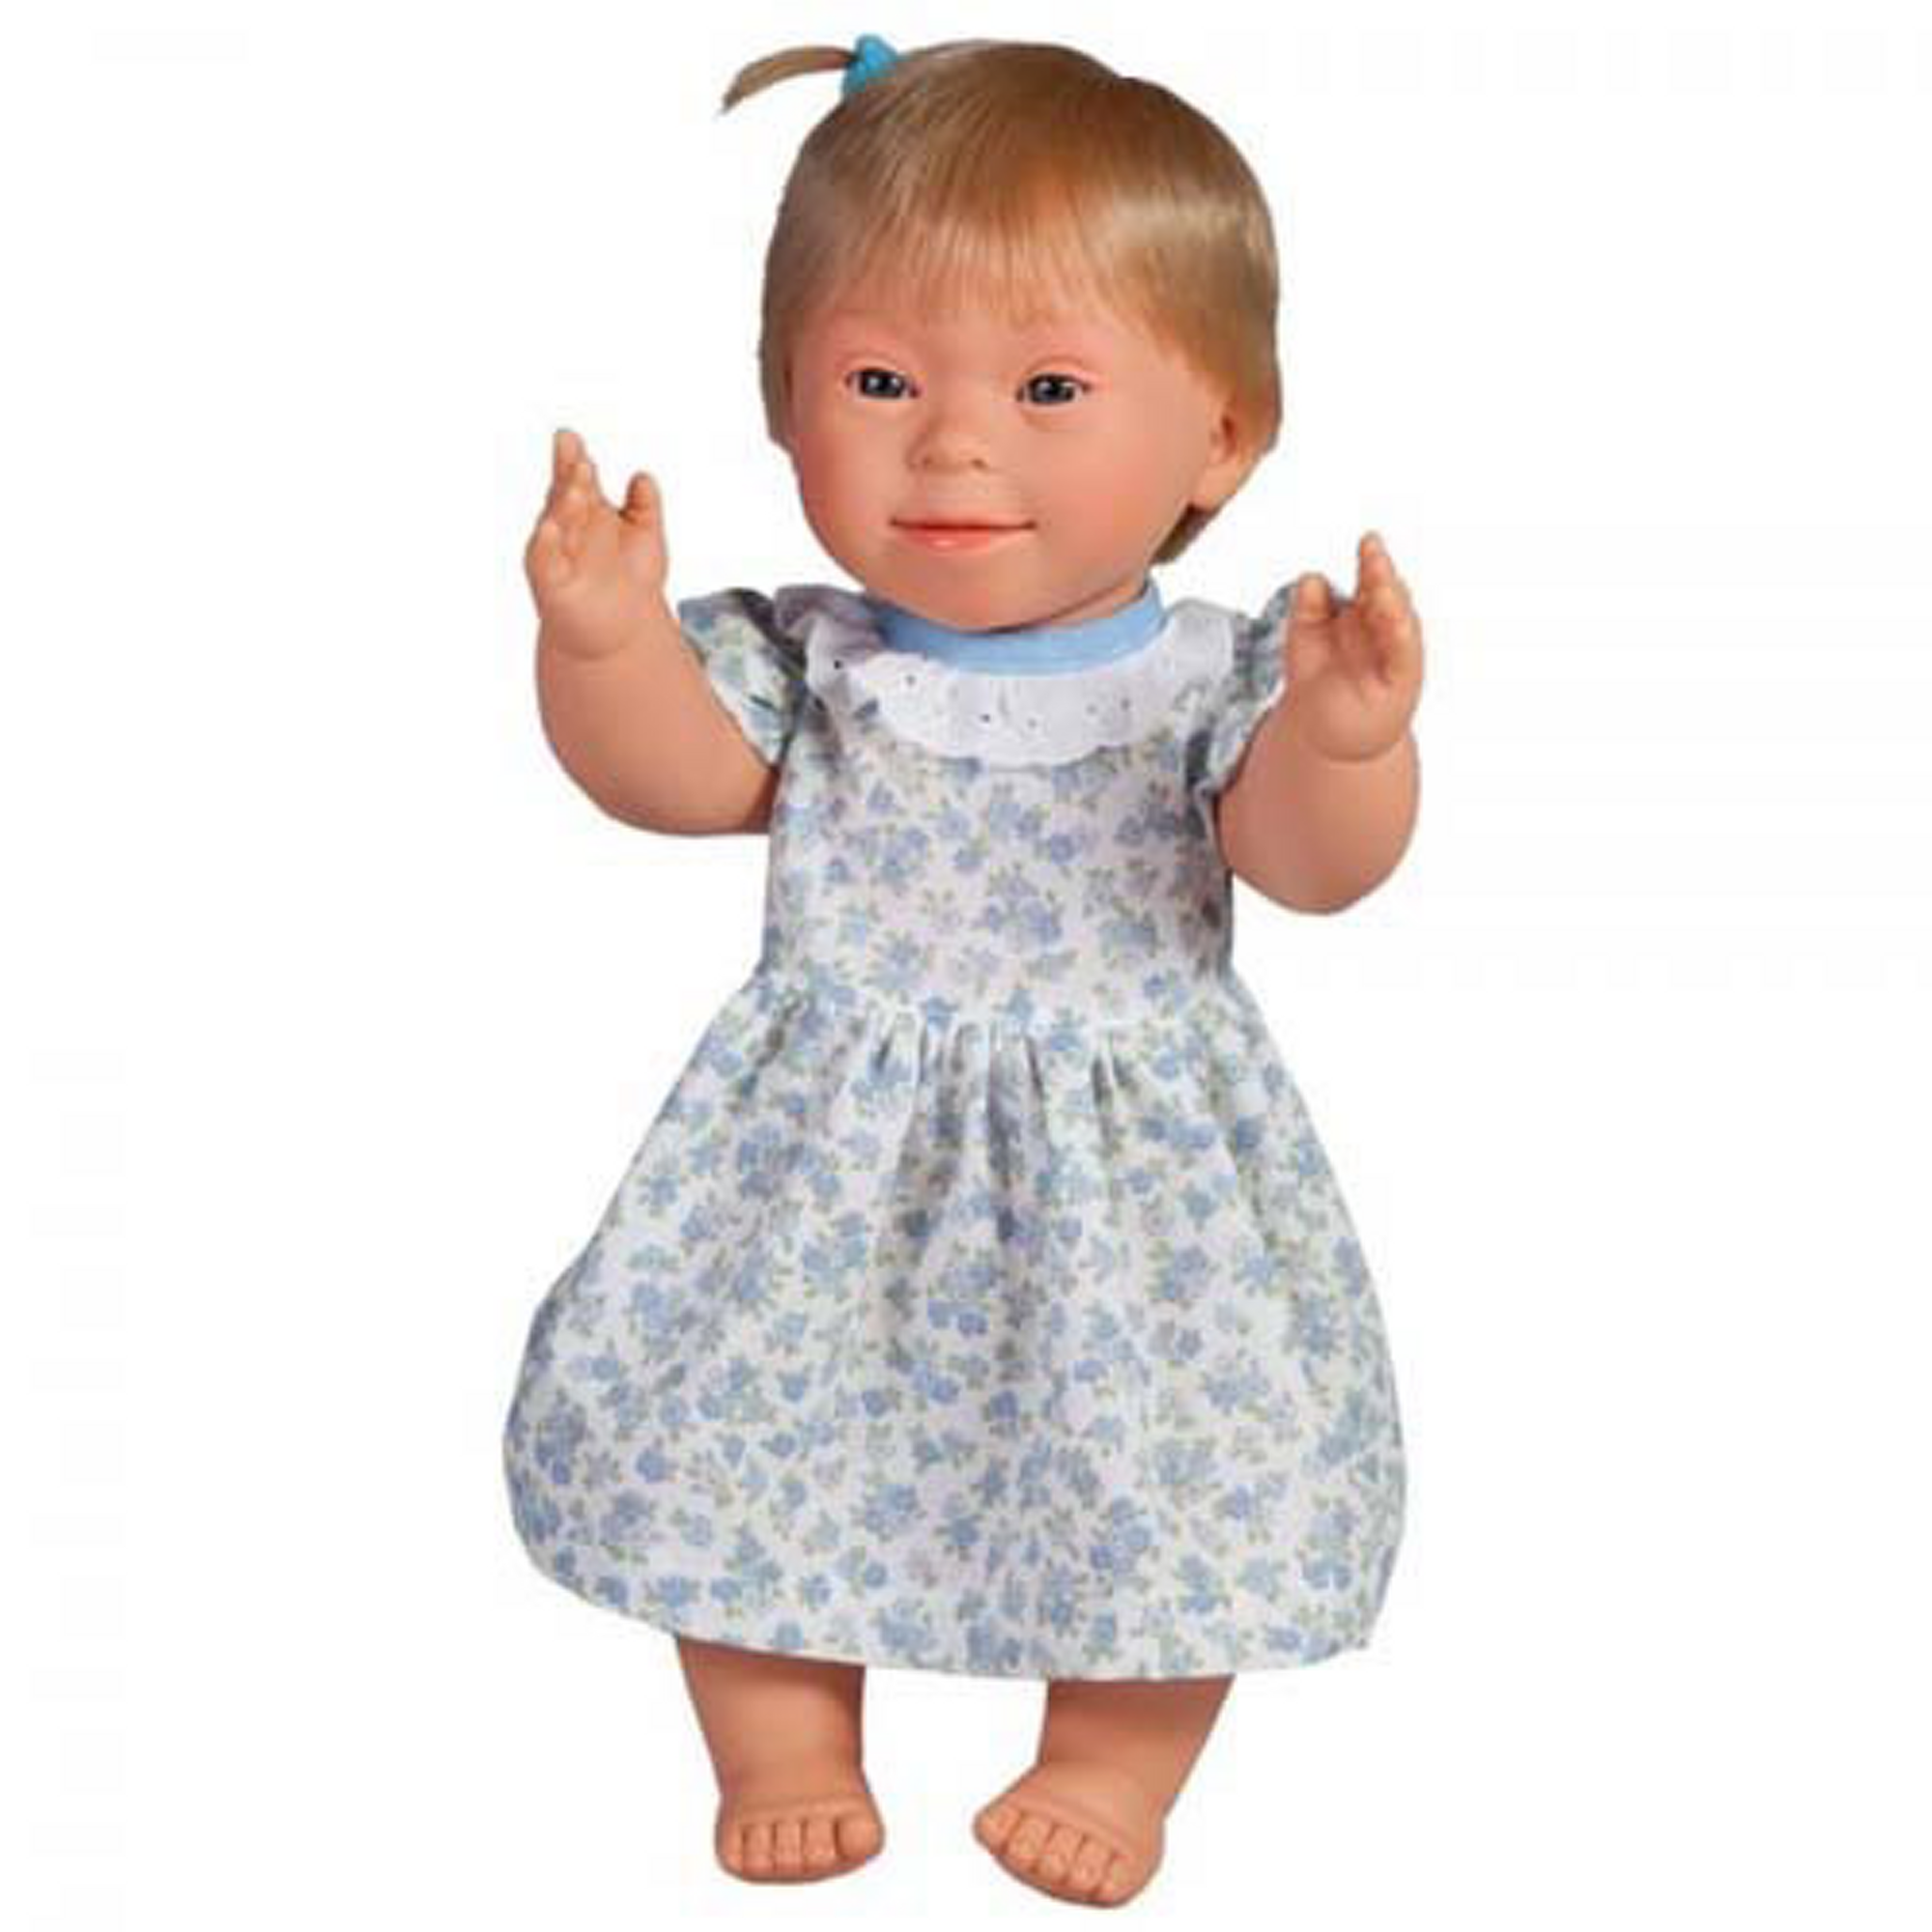 Girl Doll With Downs Syndrome Blond Hair